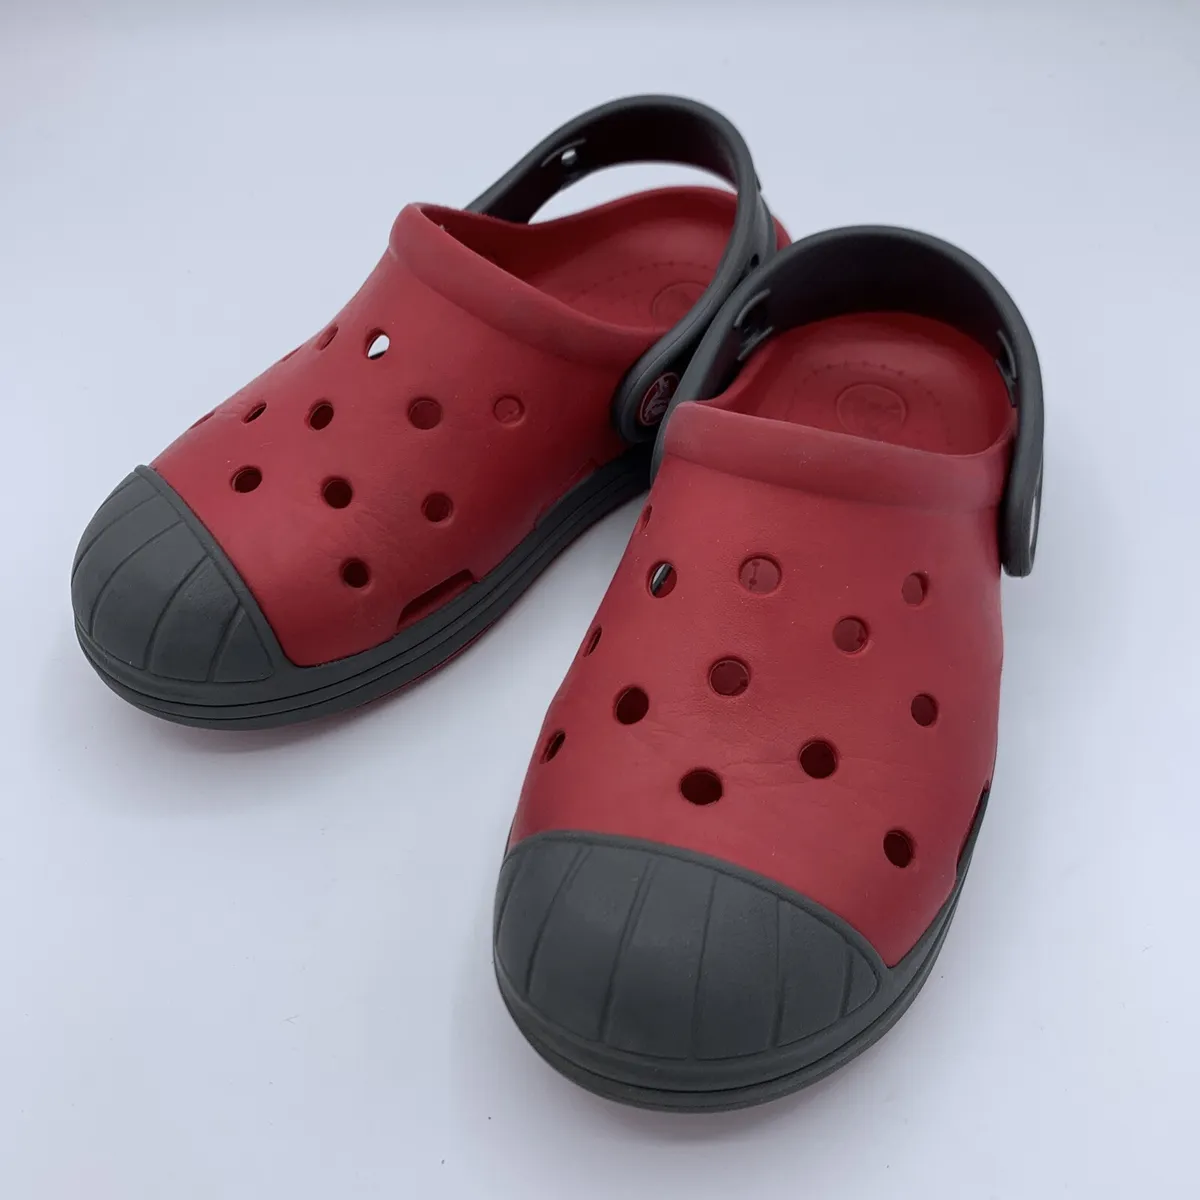 Designer Inspired Chanel and Louis Vuitton Crocs